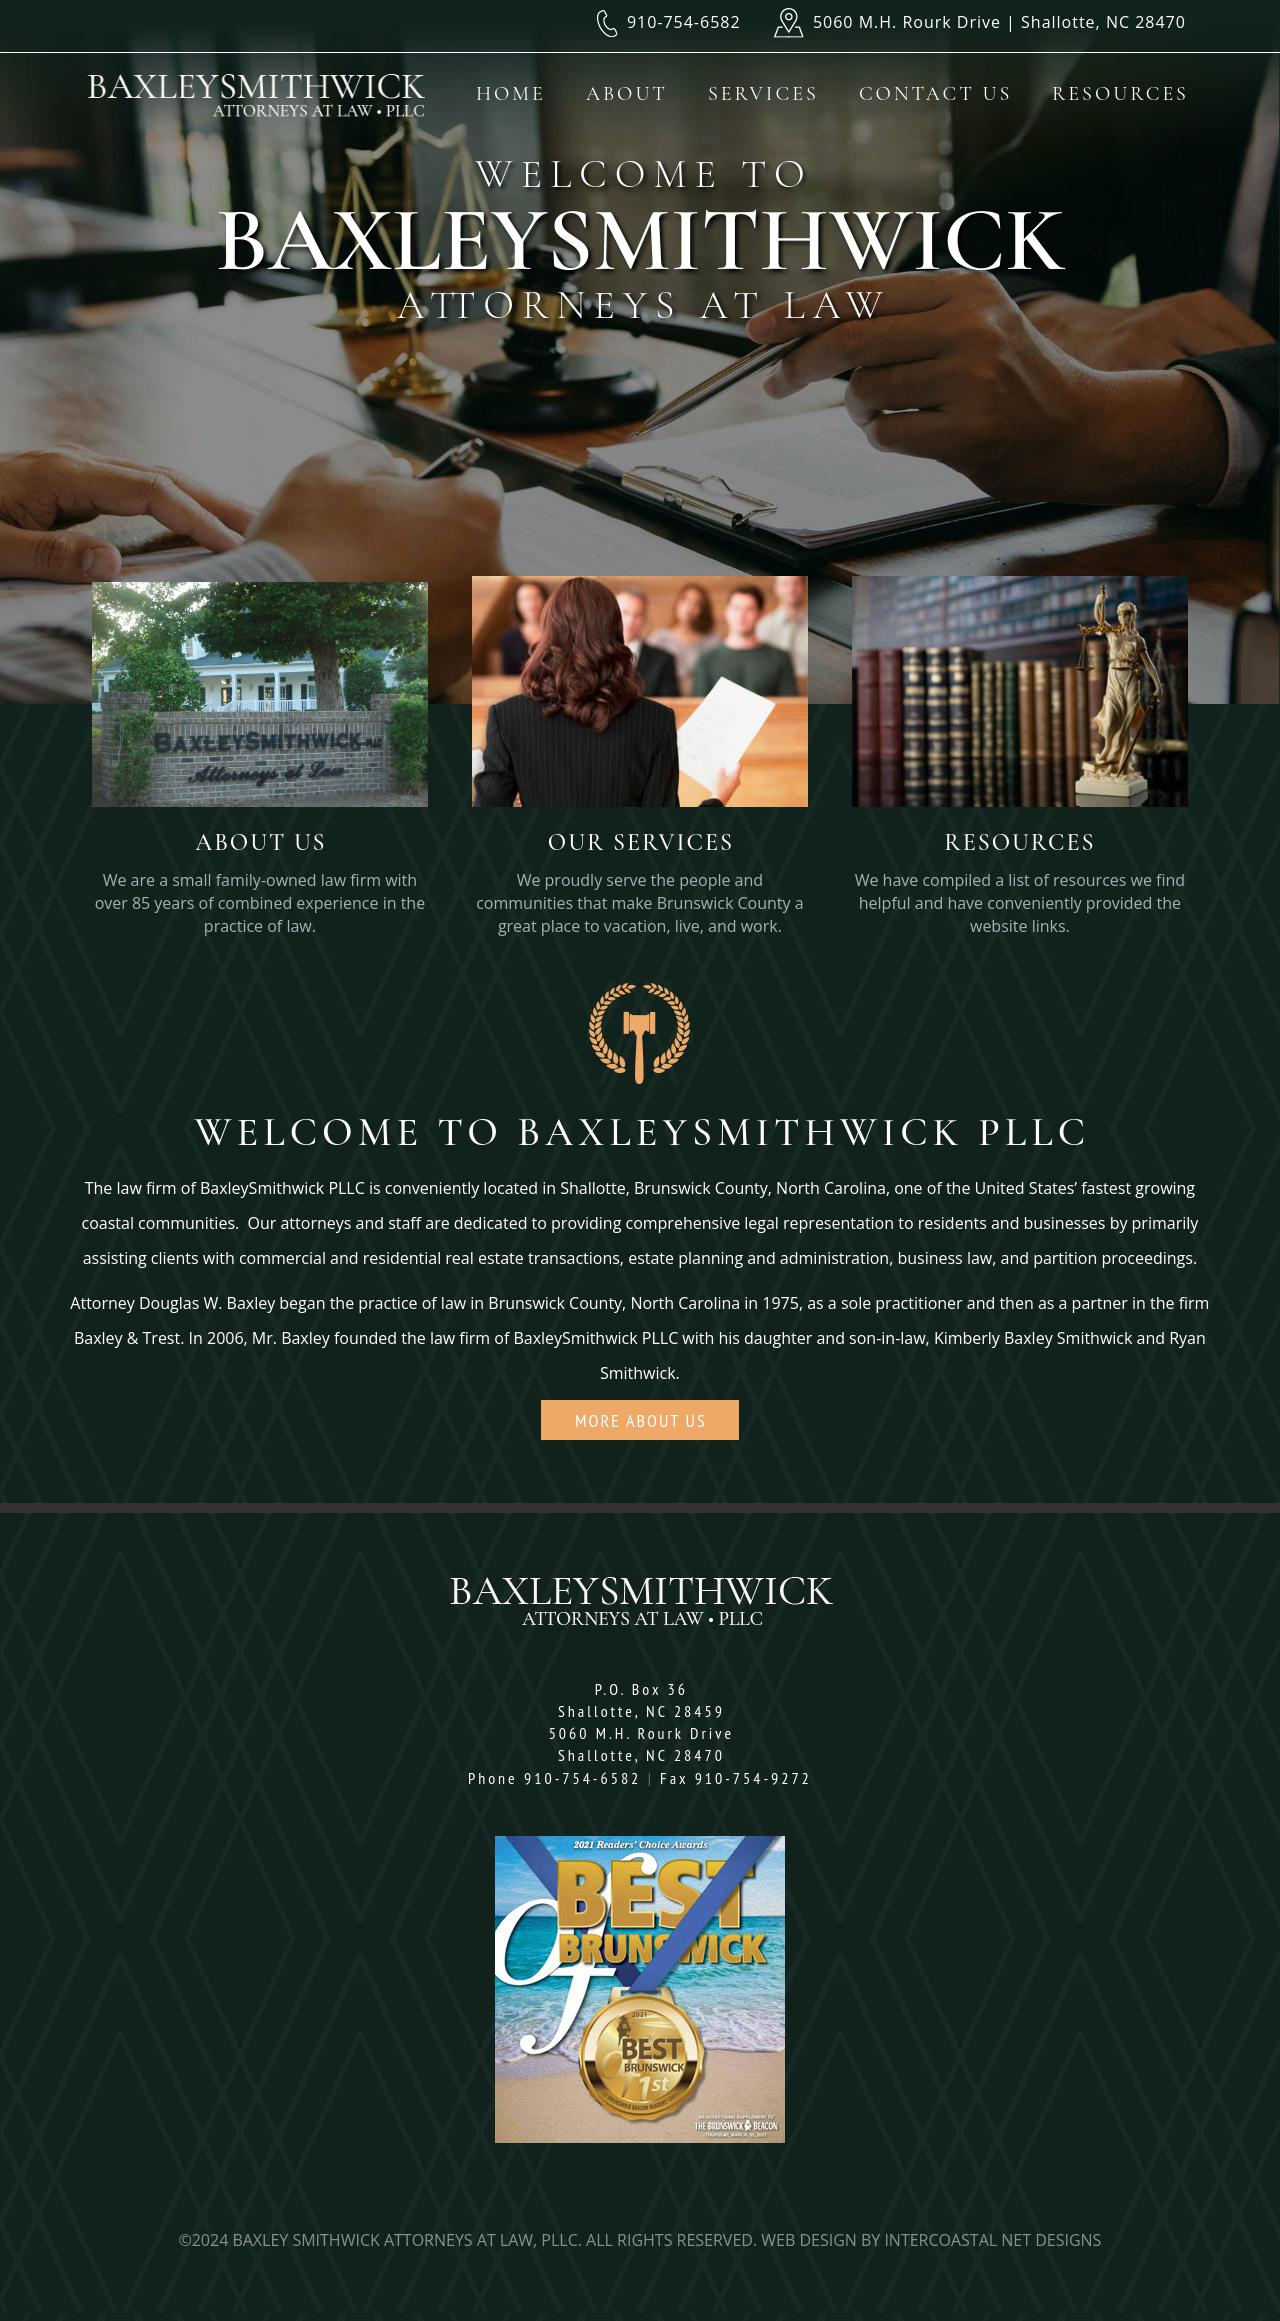 Baxley Smithwick PLLC Attorneys At Law - Shallotte NC Lawyers